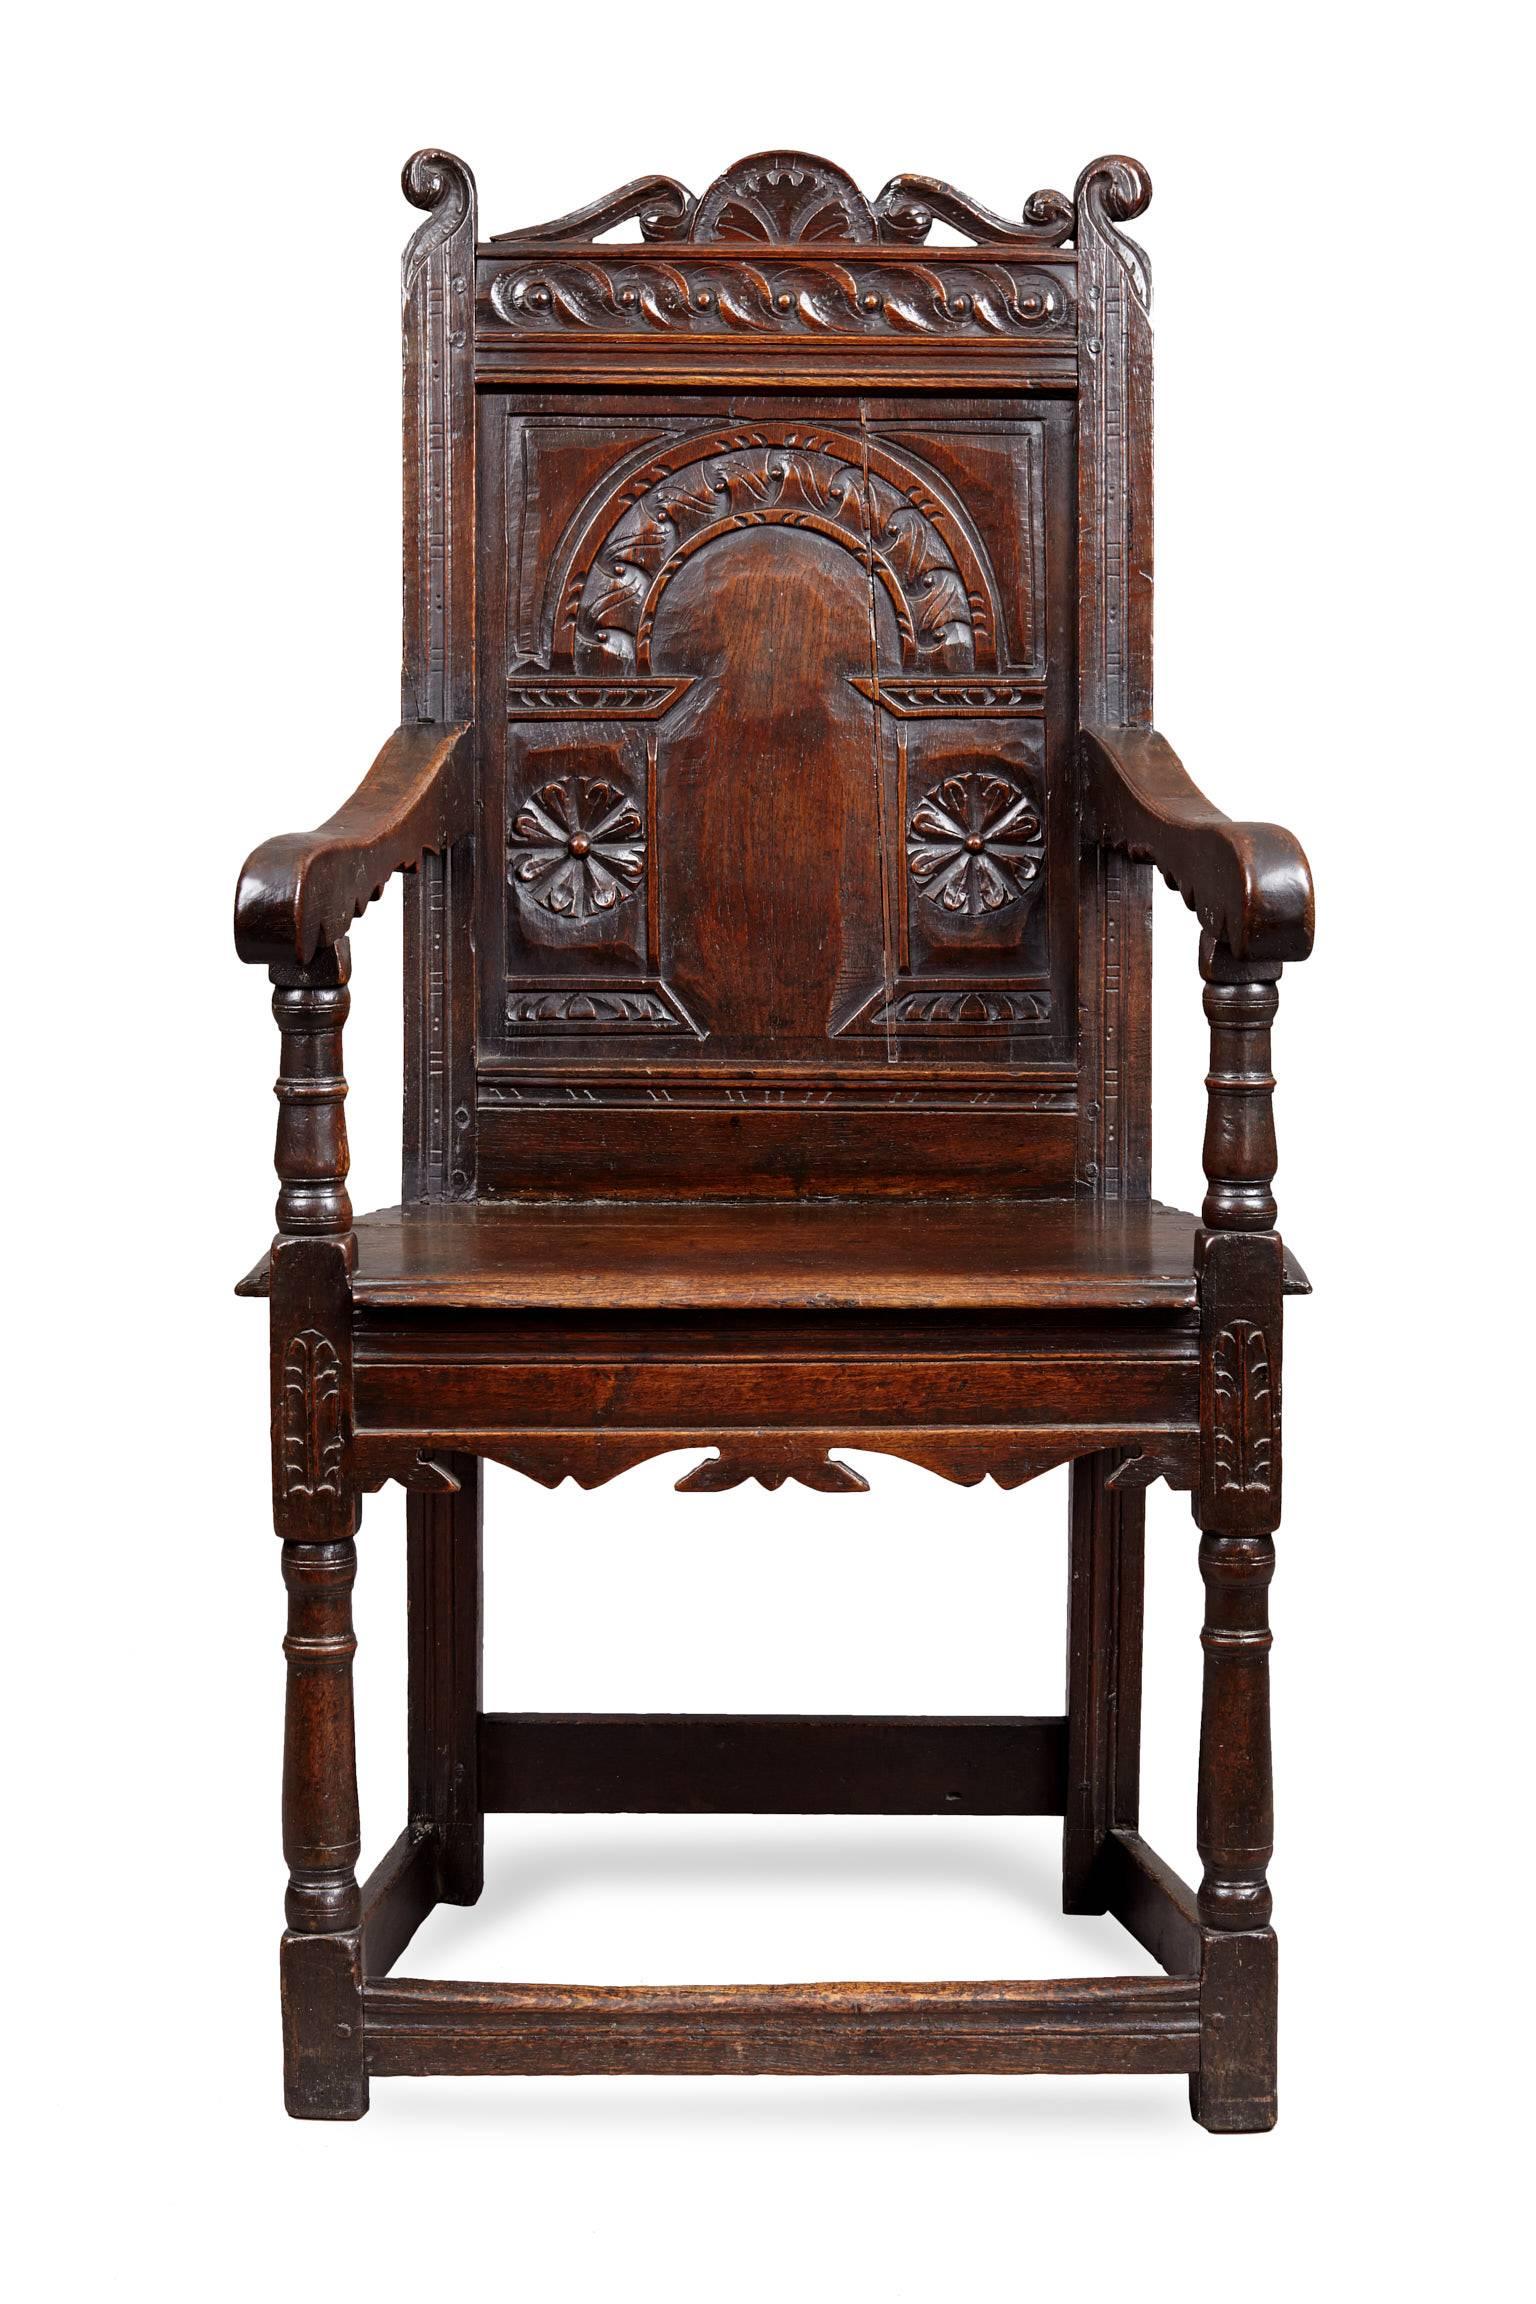 Charles I oak armchair, Gloucestershire

The perforated scroll carved cresting flanked by reverse scroll carved uprights above an 'S' scroll rail and deeply carved arcaded back panel with floral carved uprights. The bold silhouette arms on turned